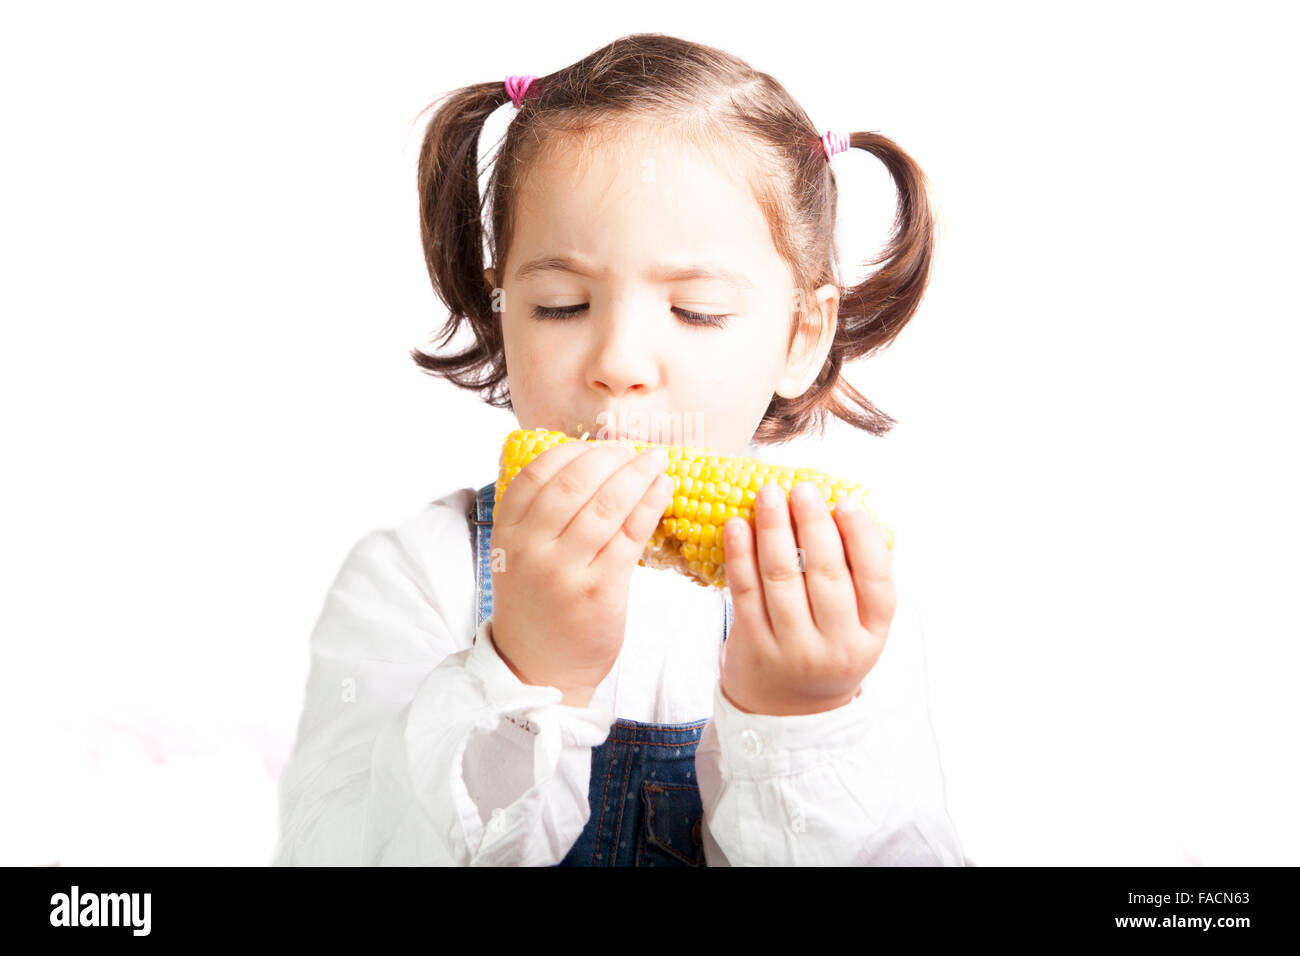 Portrait of happy girl biting a corncob. Isolated over white background Stock Photo